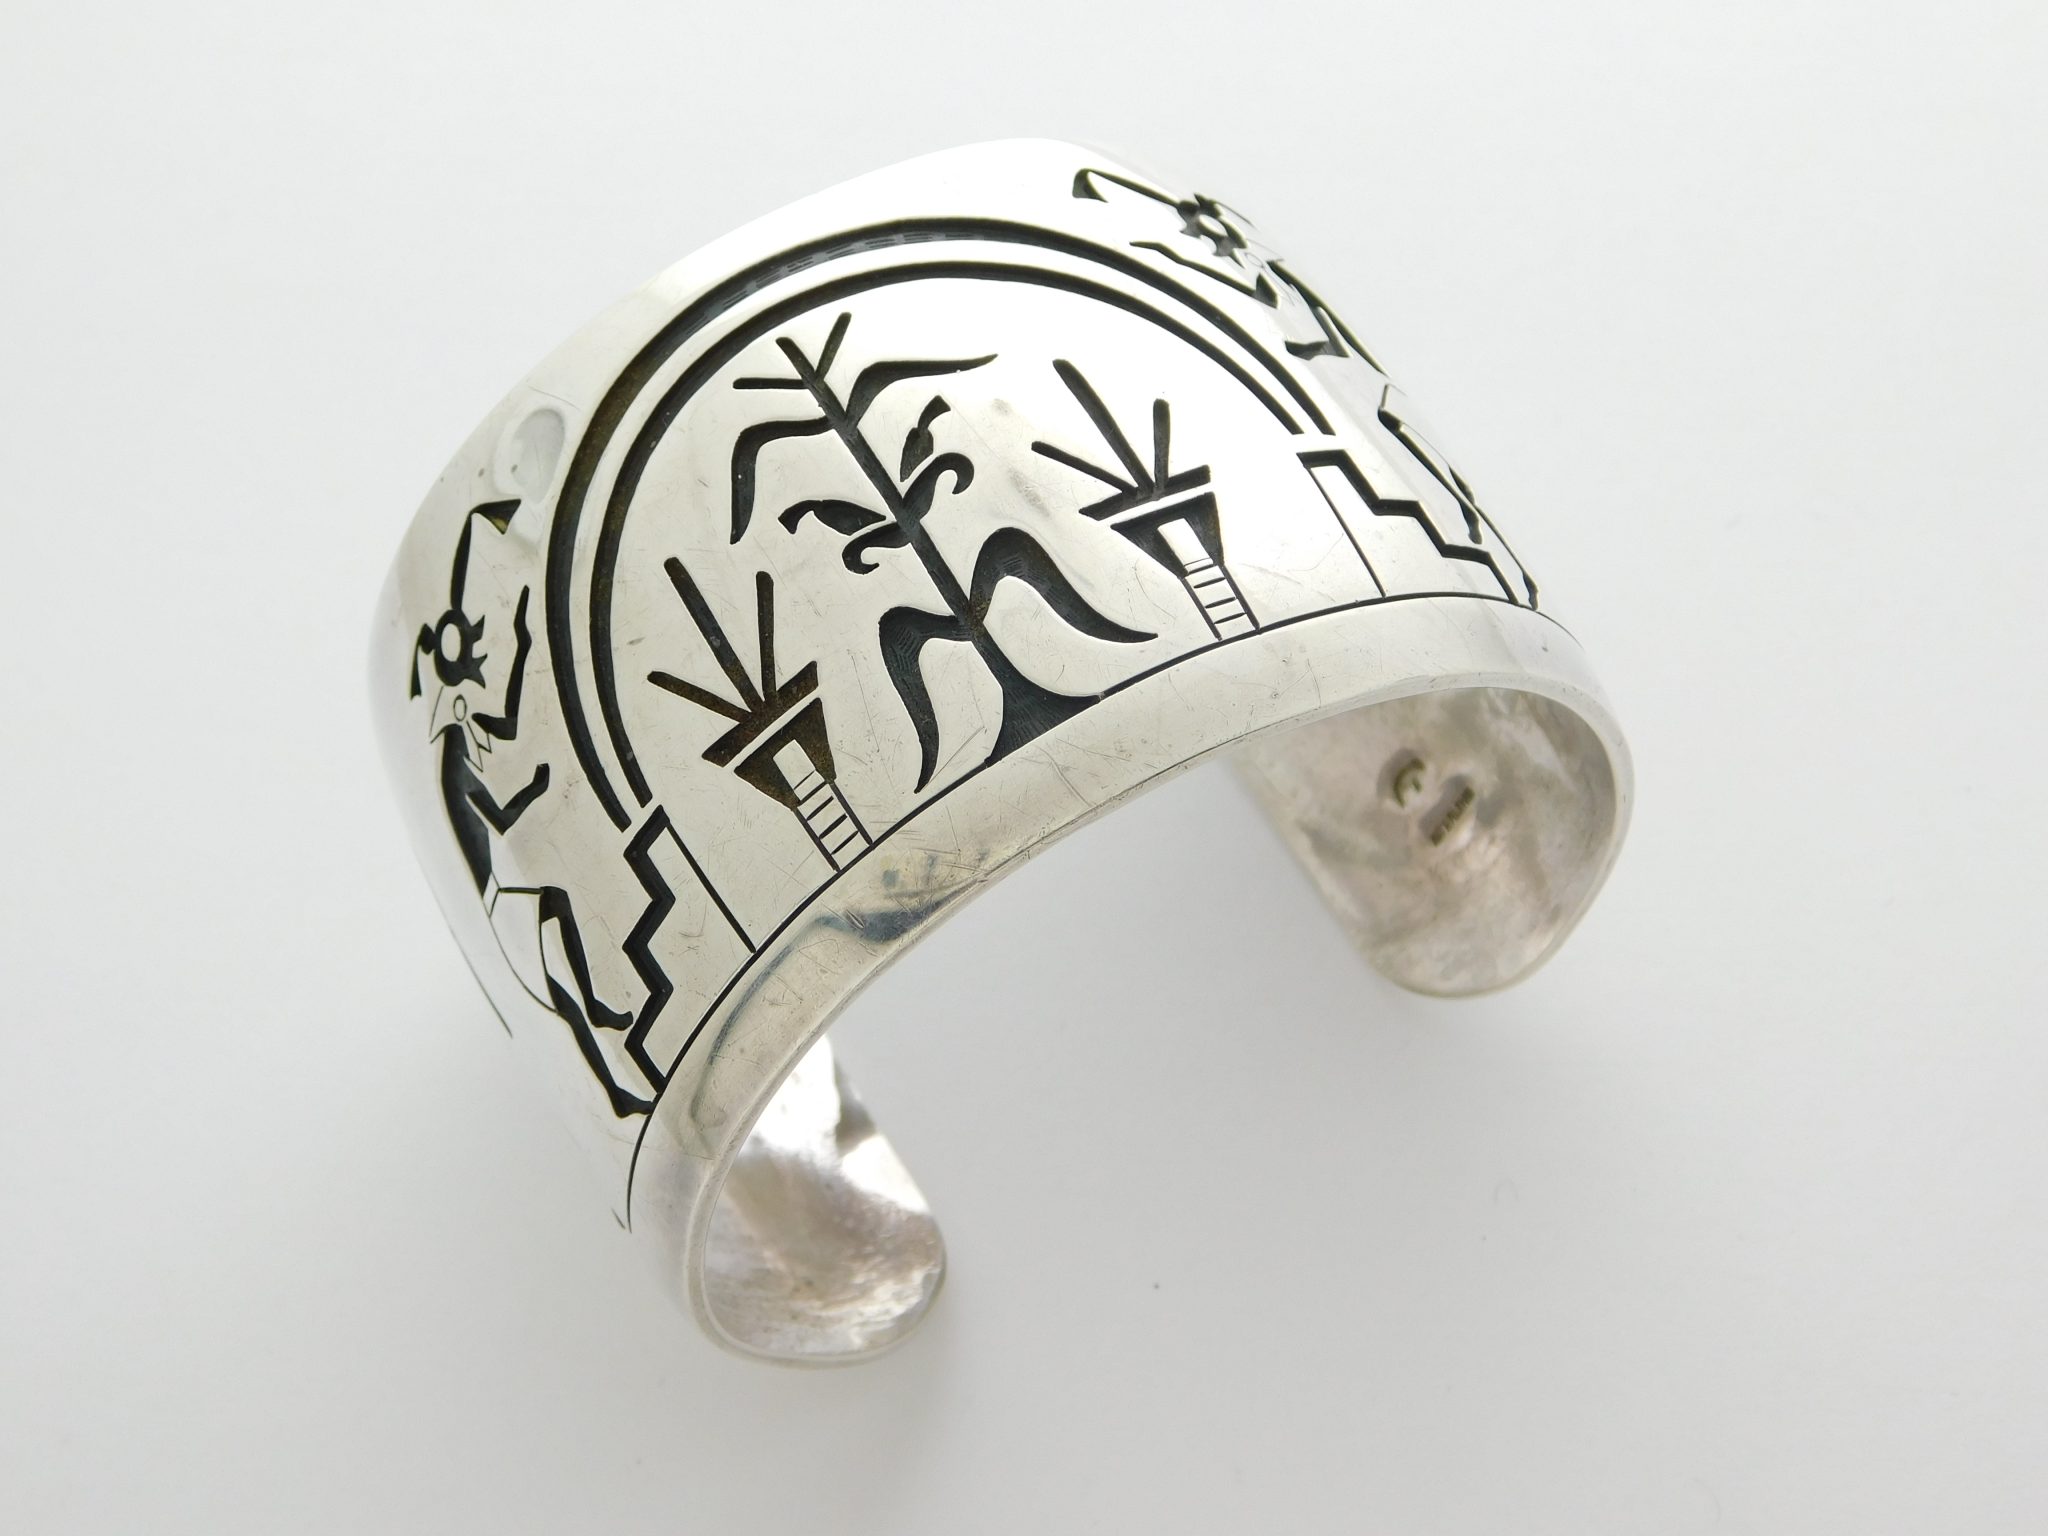 Vintage Sterling Silver Overlay Cuff Bracelet for Women or Men  Contemporary Native American Indian Hopi Jewelry